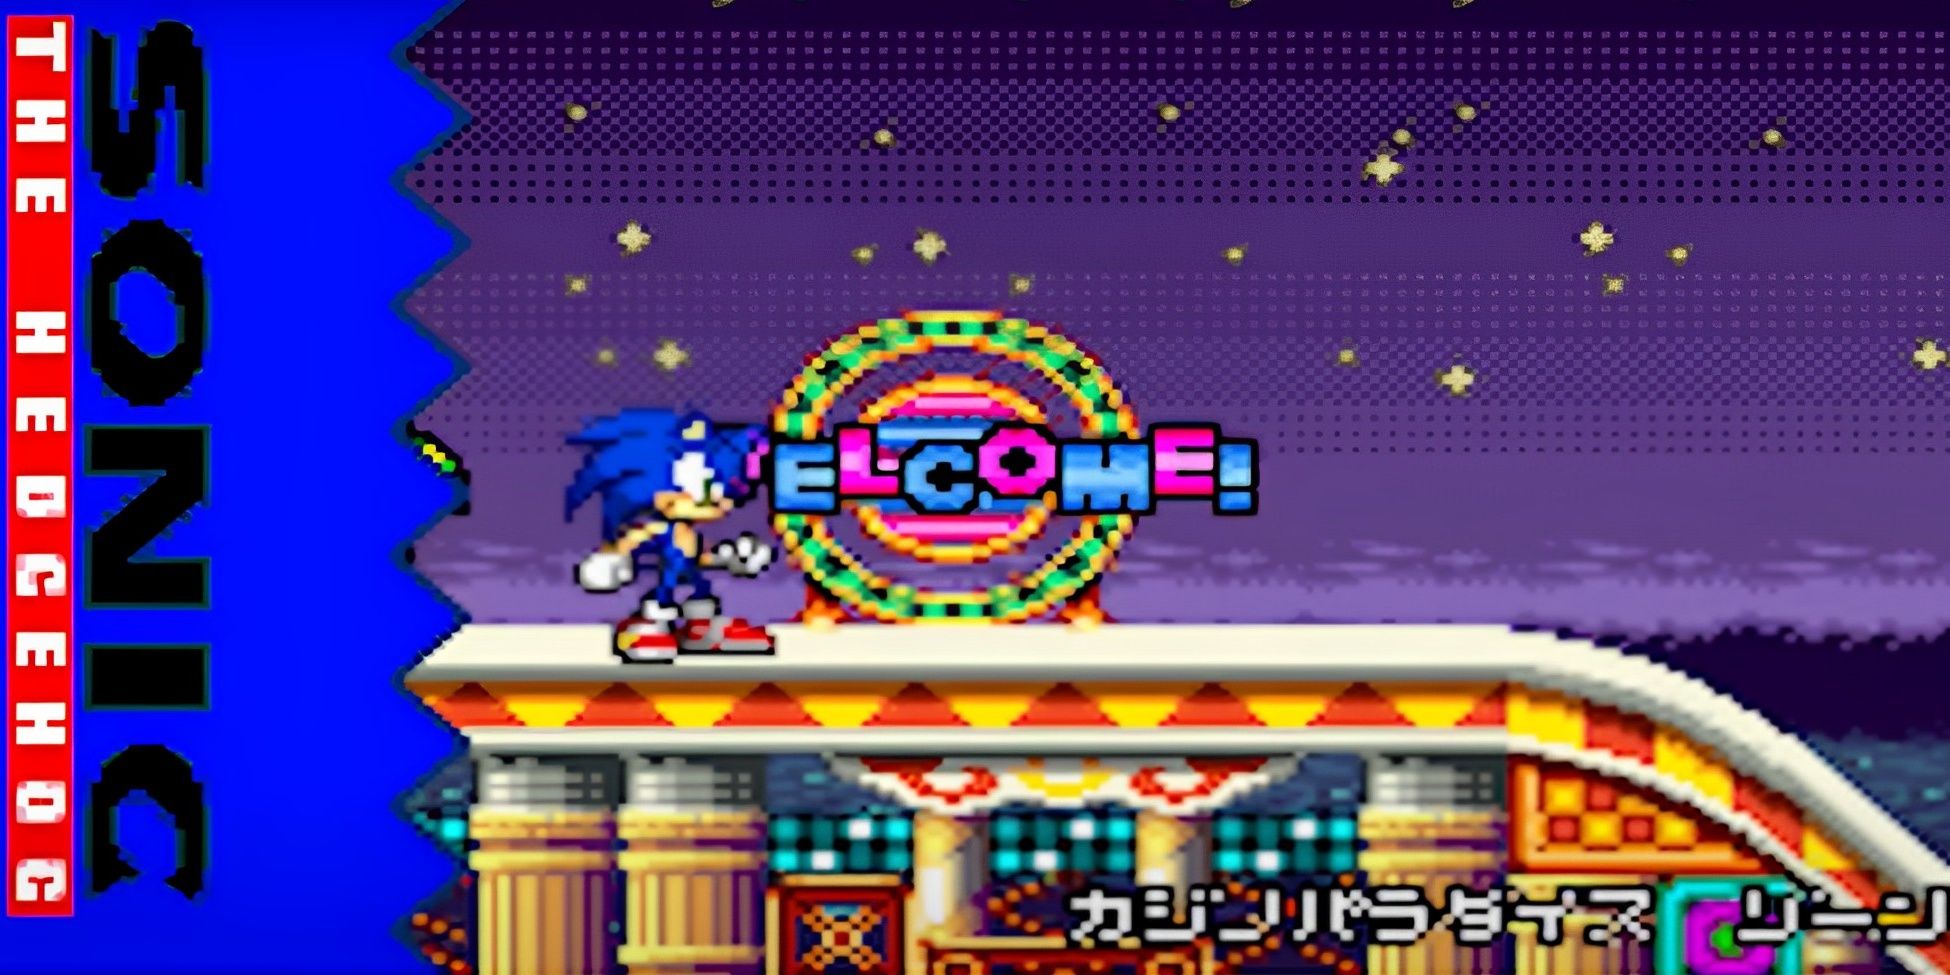 Sonic at the start of Casino Paradise Zone in Sonic Advance